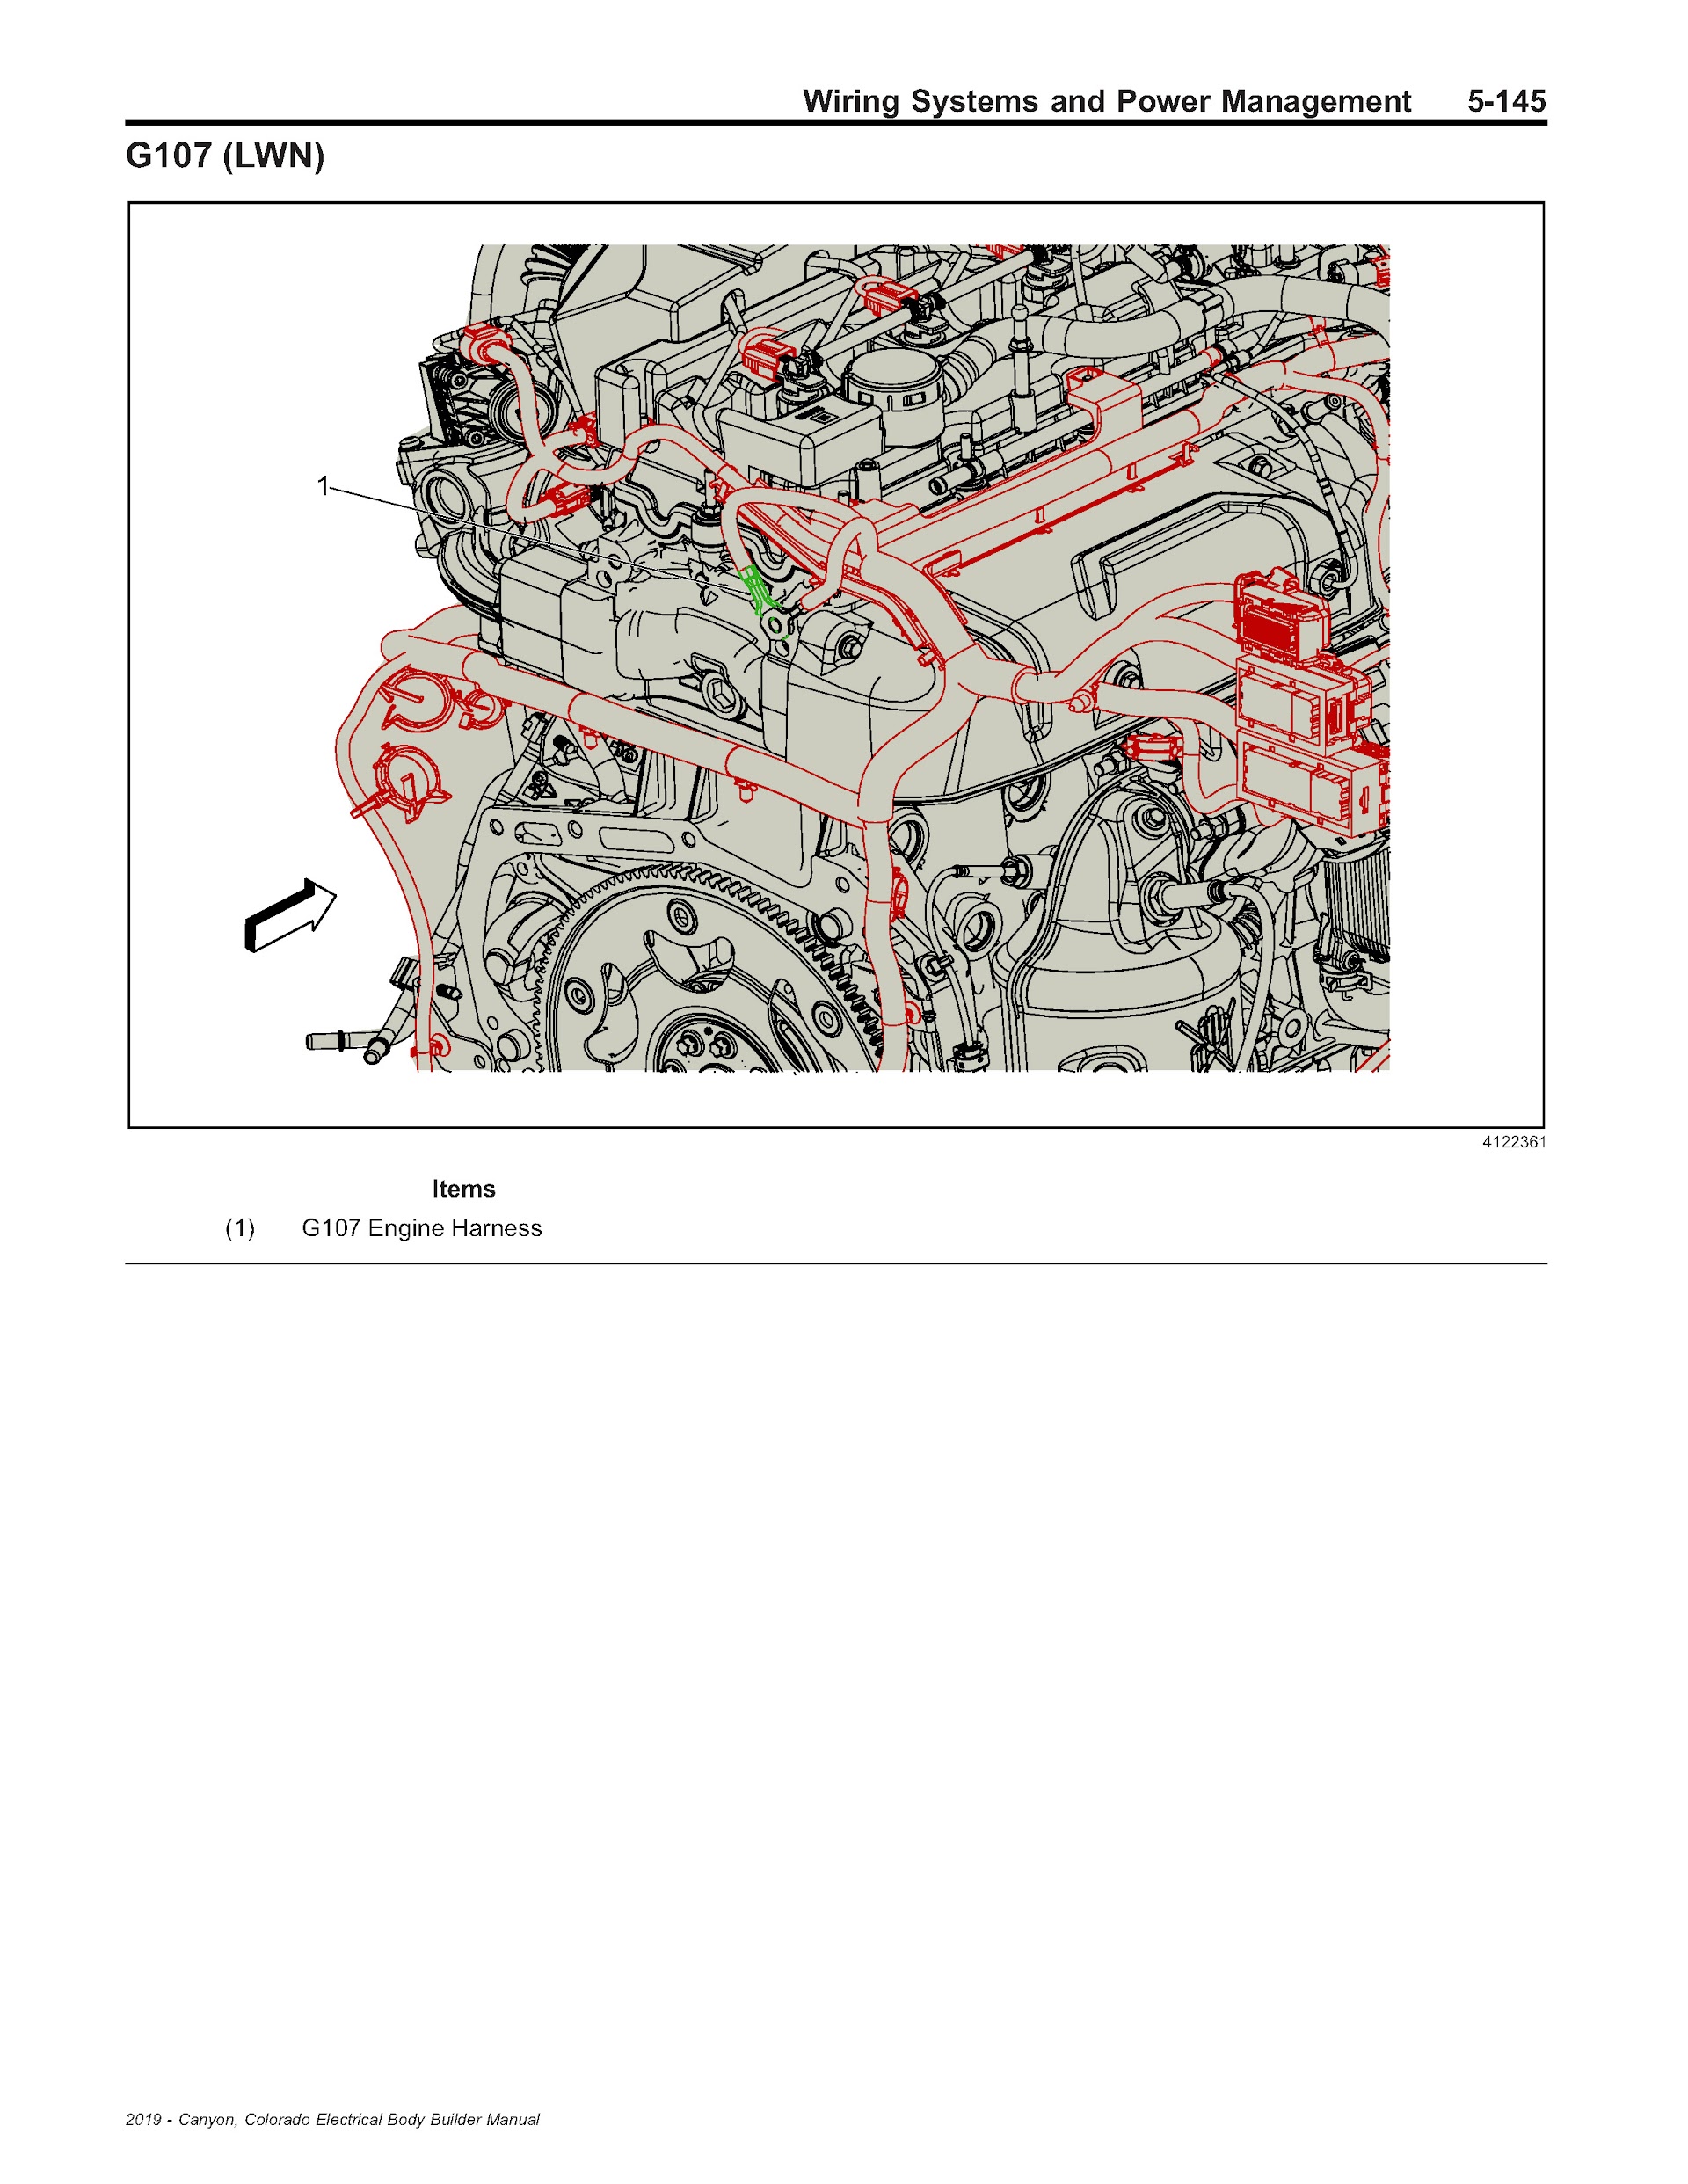 CONTENTS: 2019 GMC Canyon Wiring Diagram and Chevrolet Colorado, Wiring Harness